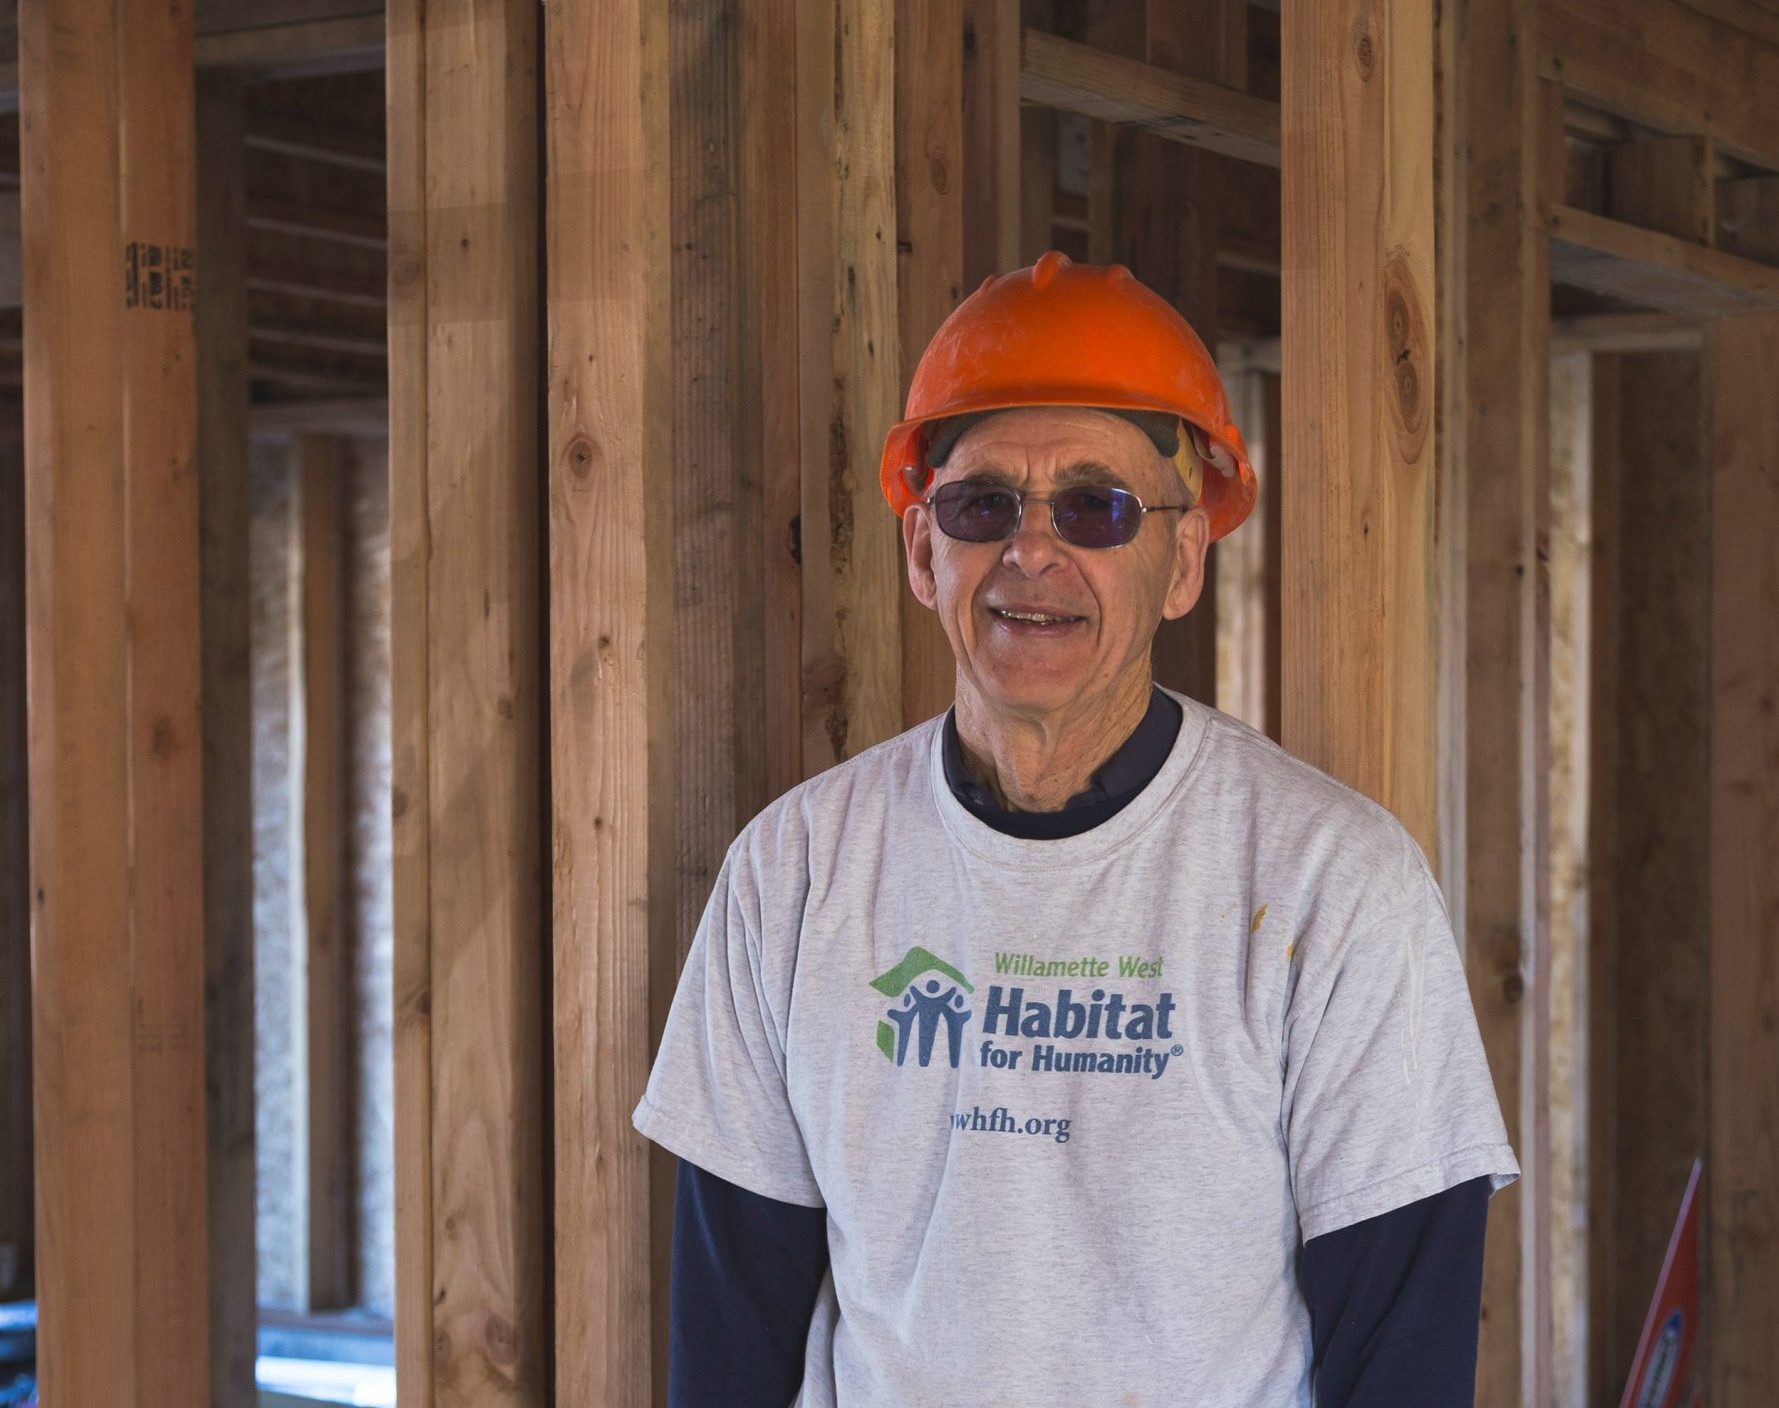 Cliff is at a Habitat for Humanity construction site with a hard hat on